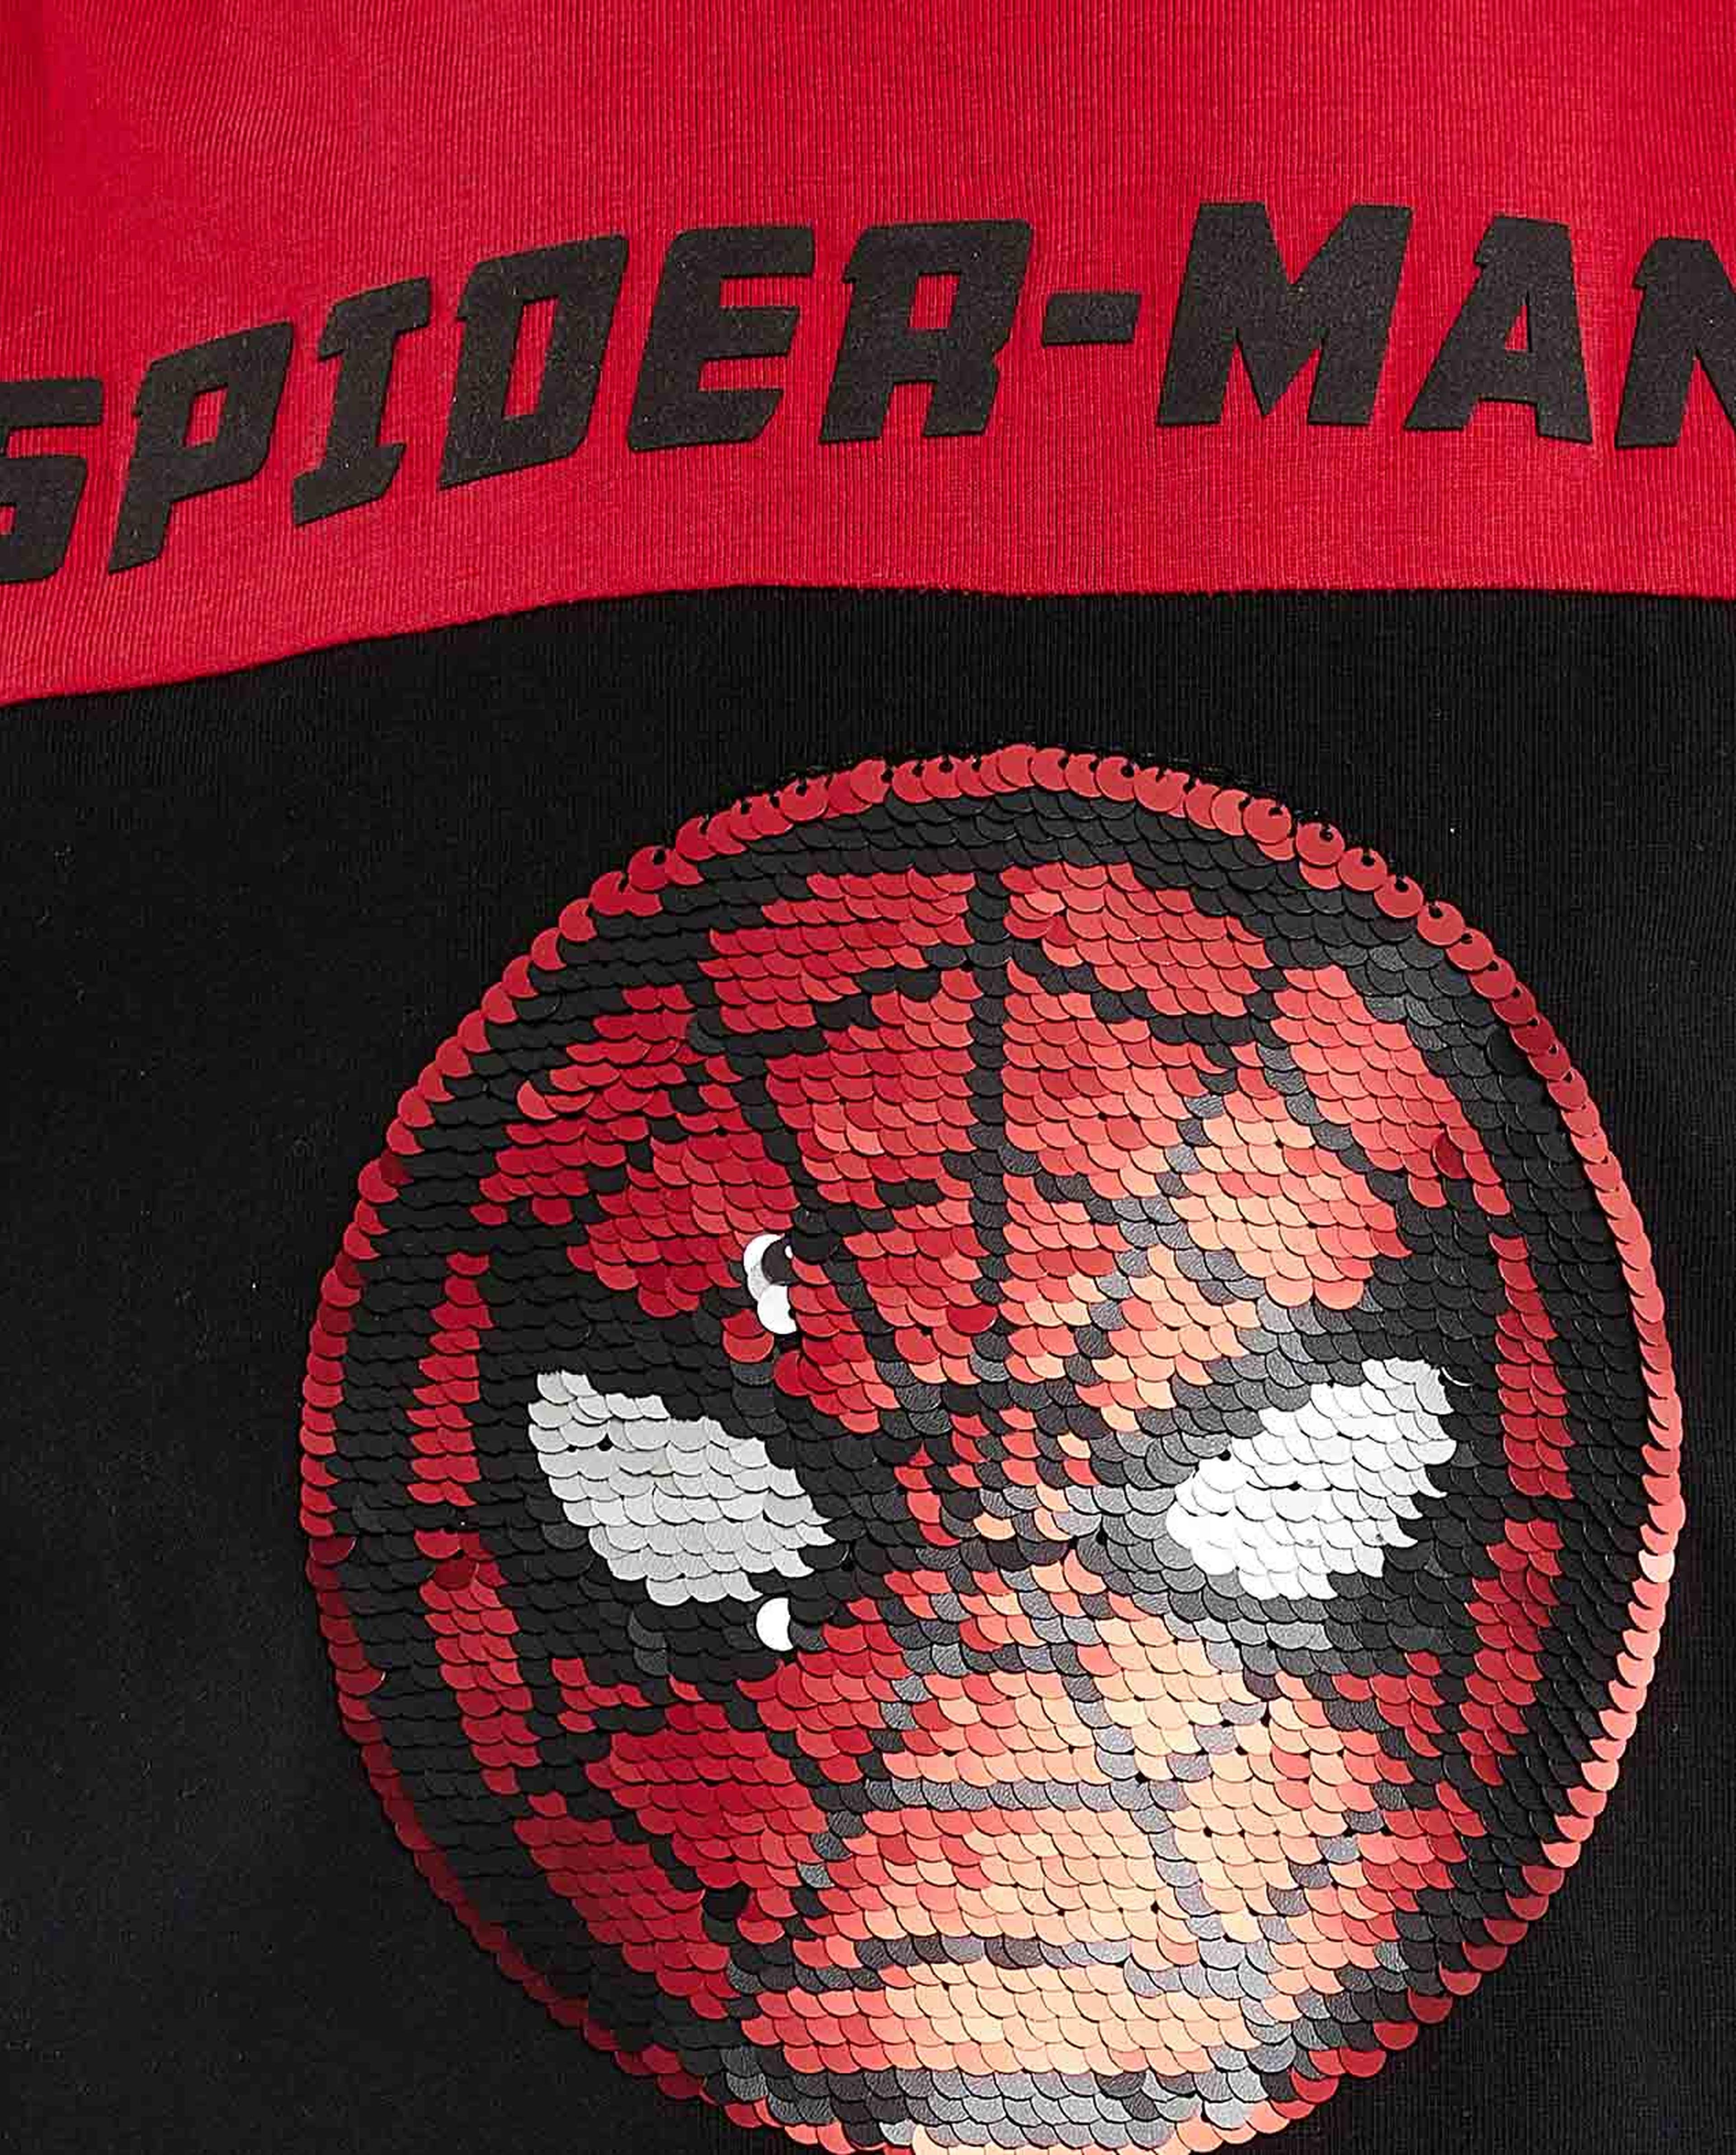 Spiderman Sequined T-Shirt with Crew Neck and Short Sleeves